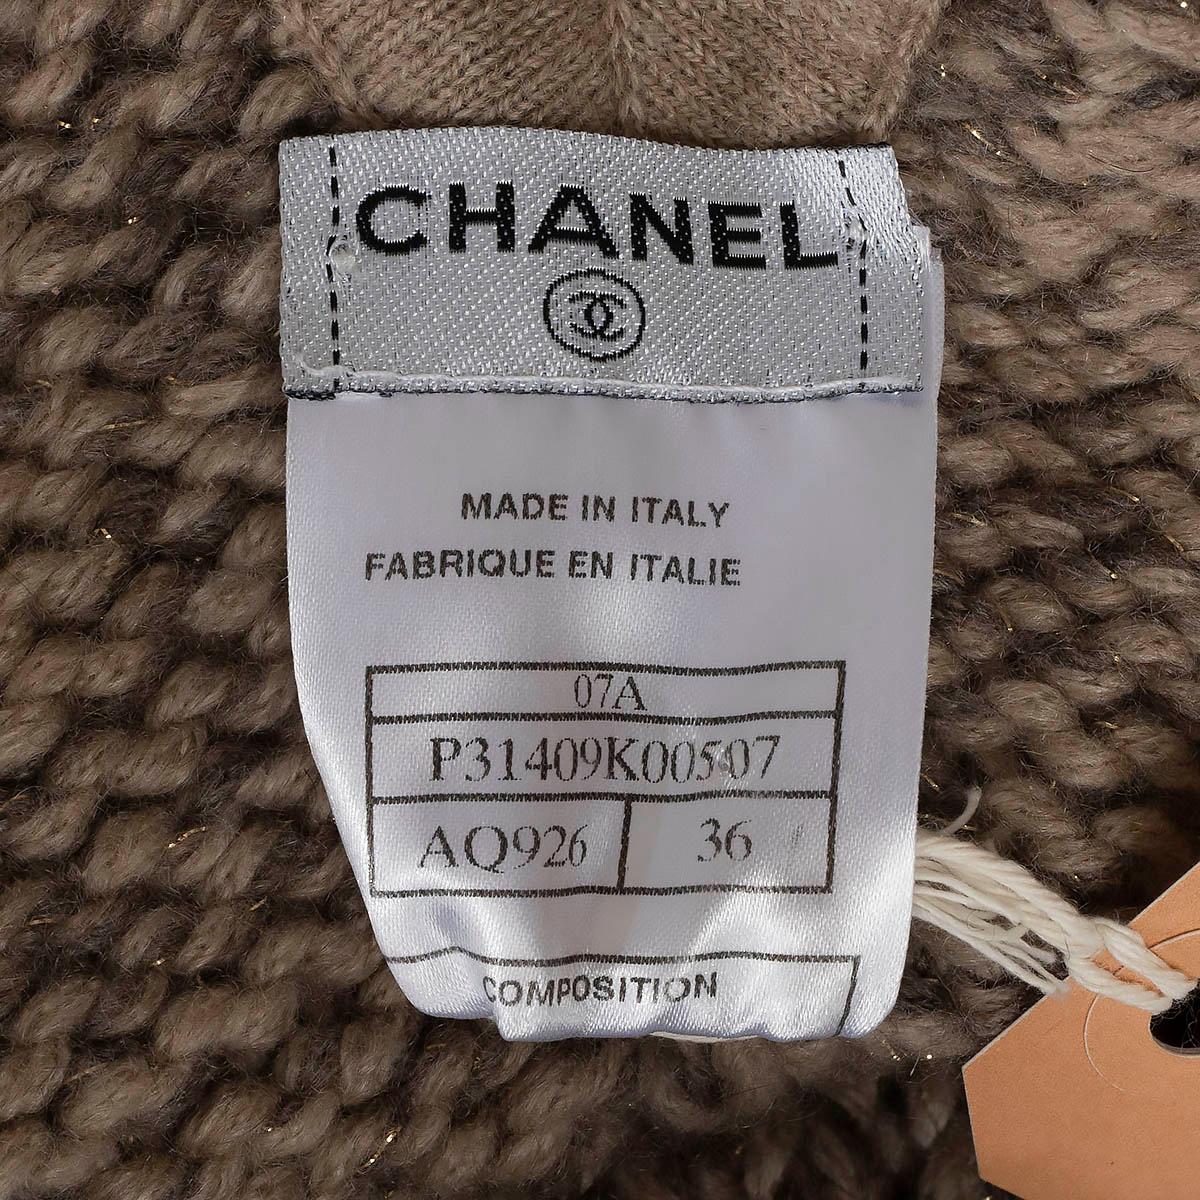 CHANEL beige taupe cashmere 2007 07A BEADED LUREX Knit Dress 36 XS For Sale 3